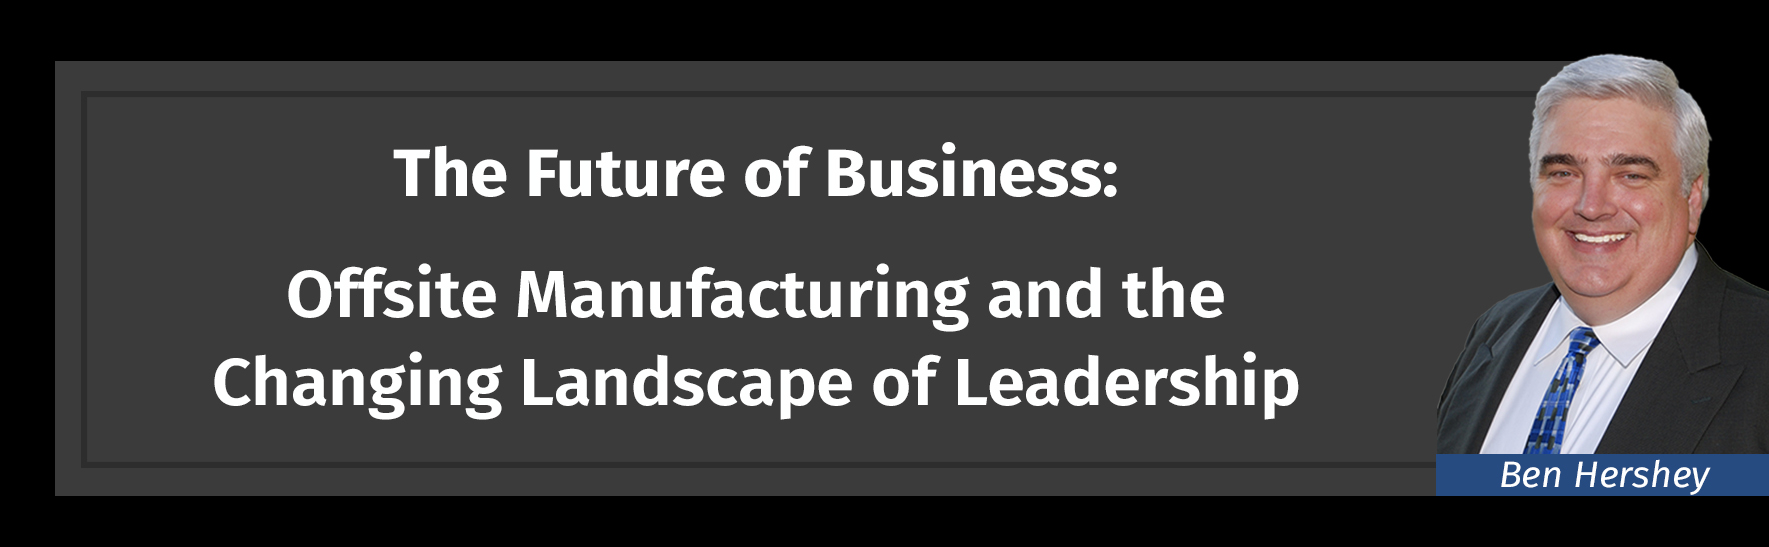 The Future of Offsite Manufacturing and Leadership, Ben Hershey